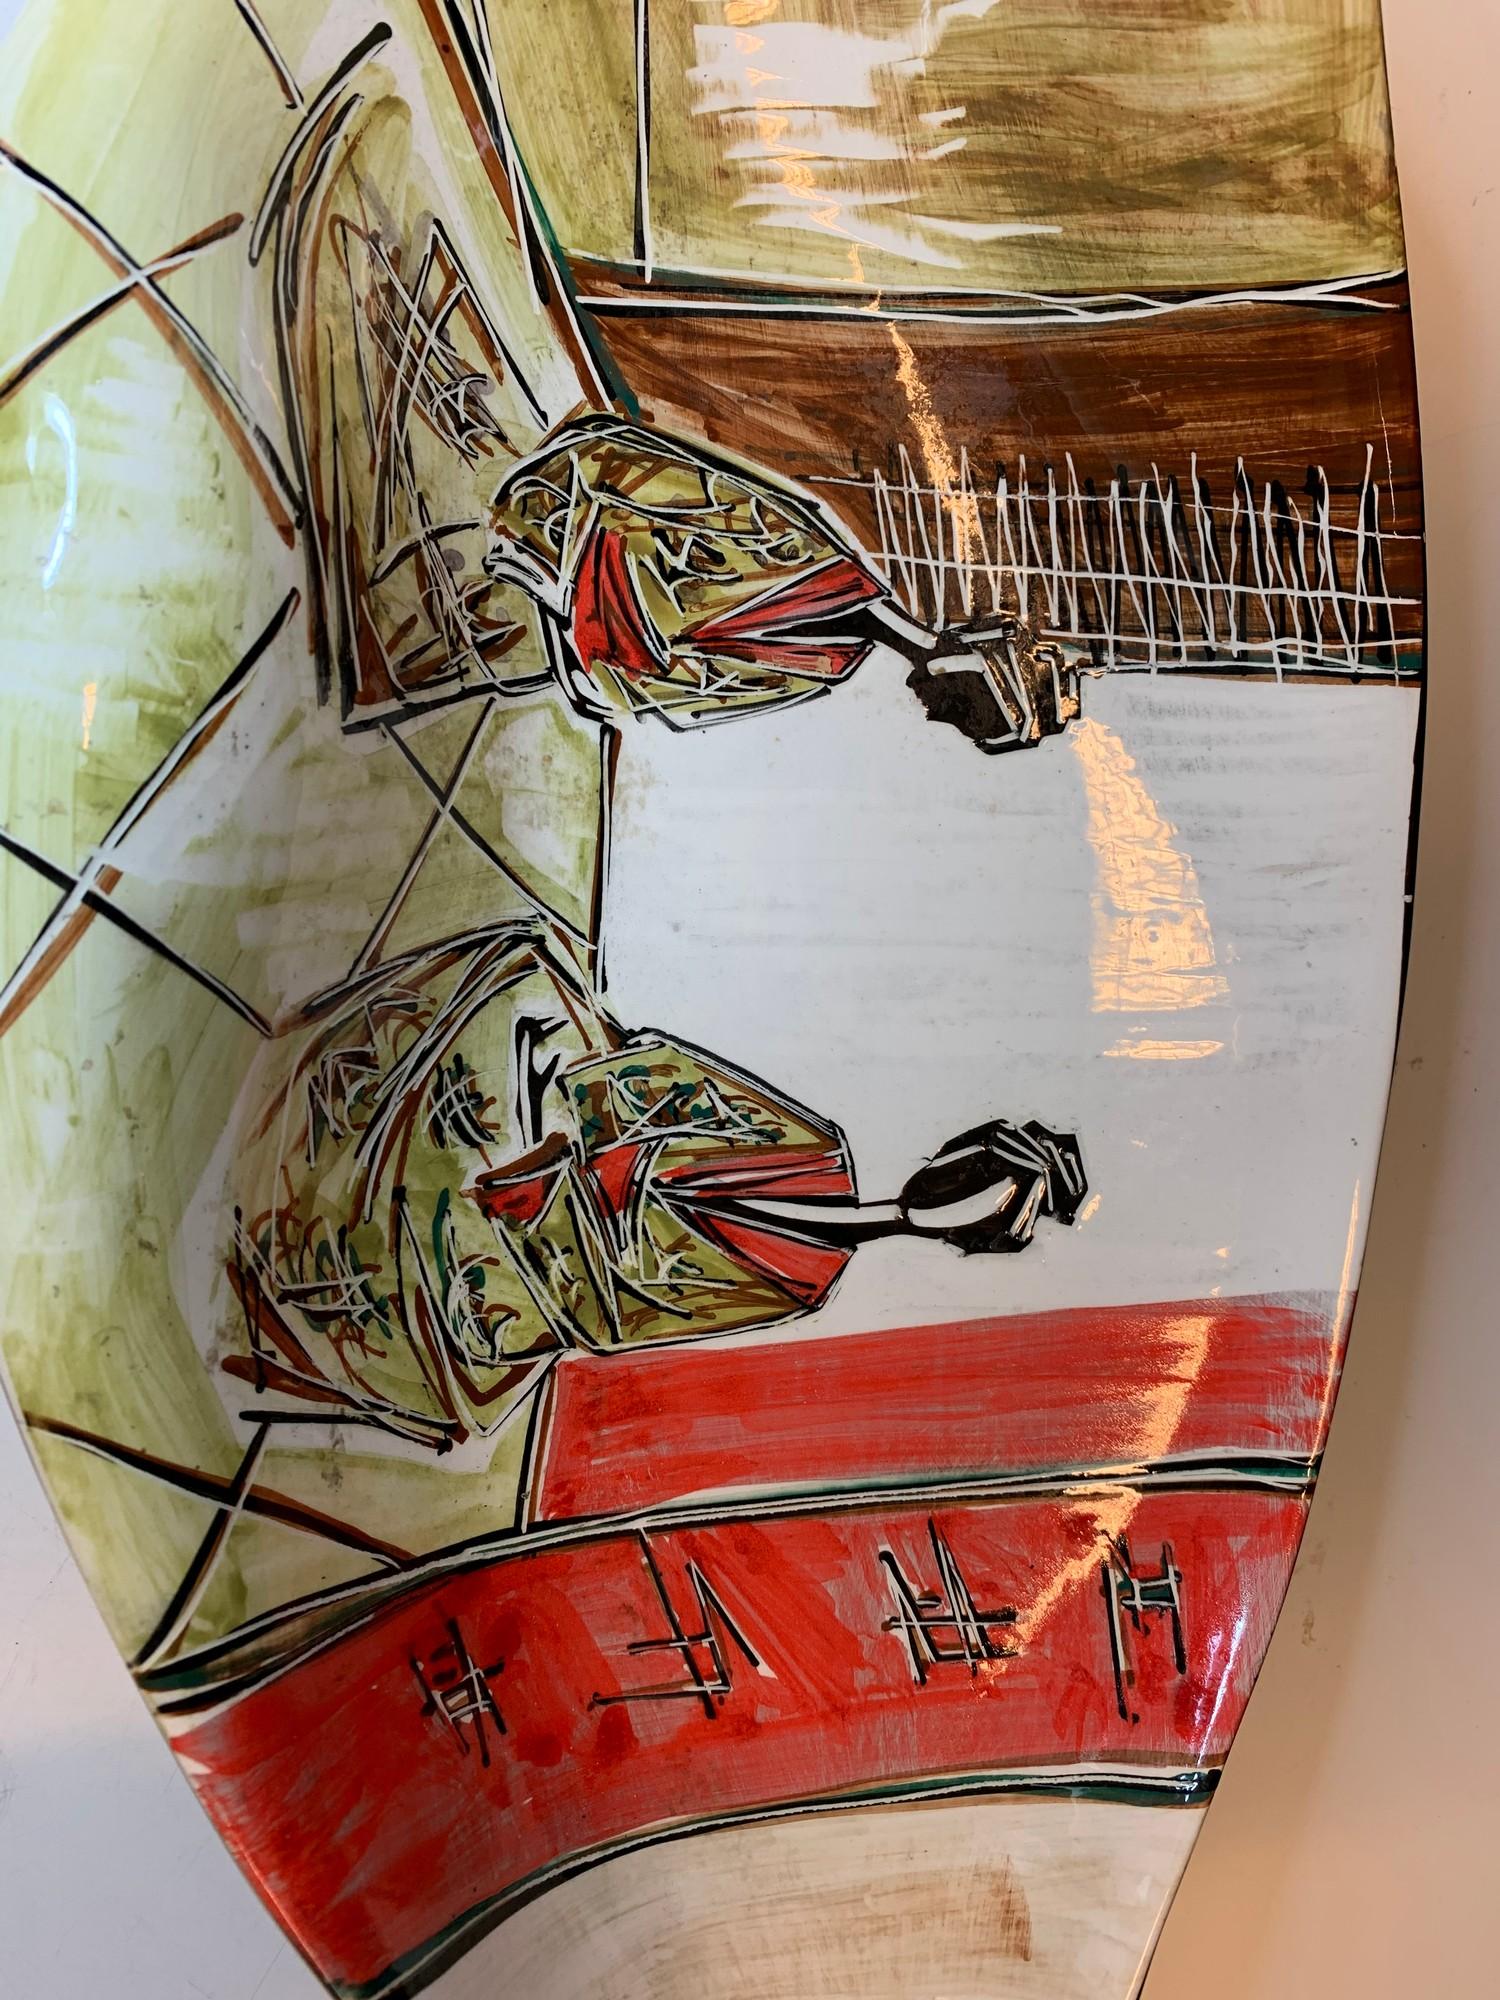 Italian ceramic 1950s style hand painted with the Japanese influence. Signed by Donatella - Image 4 of 7